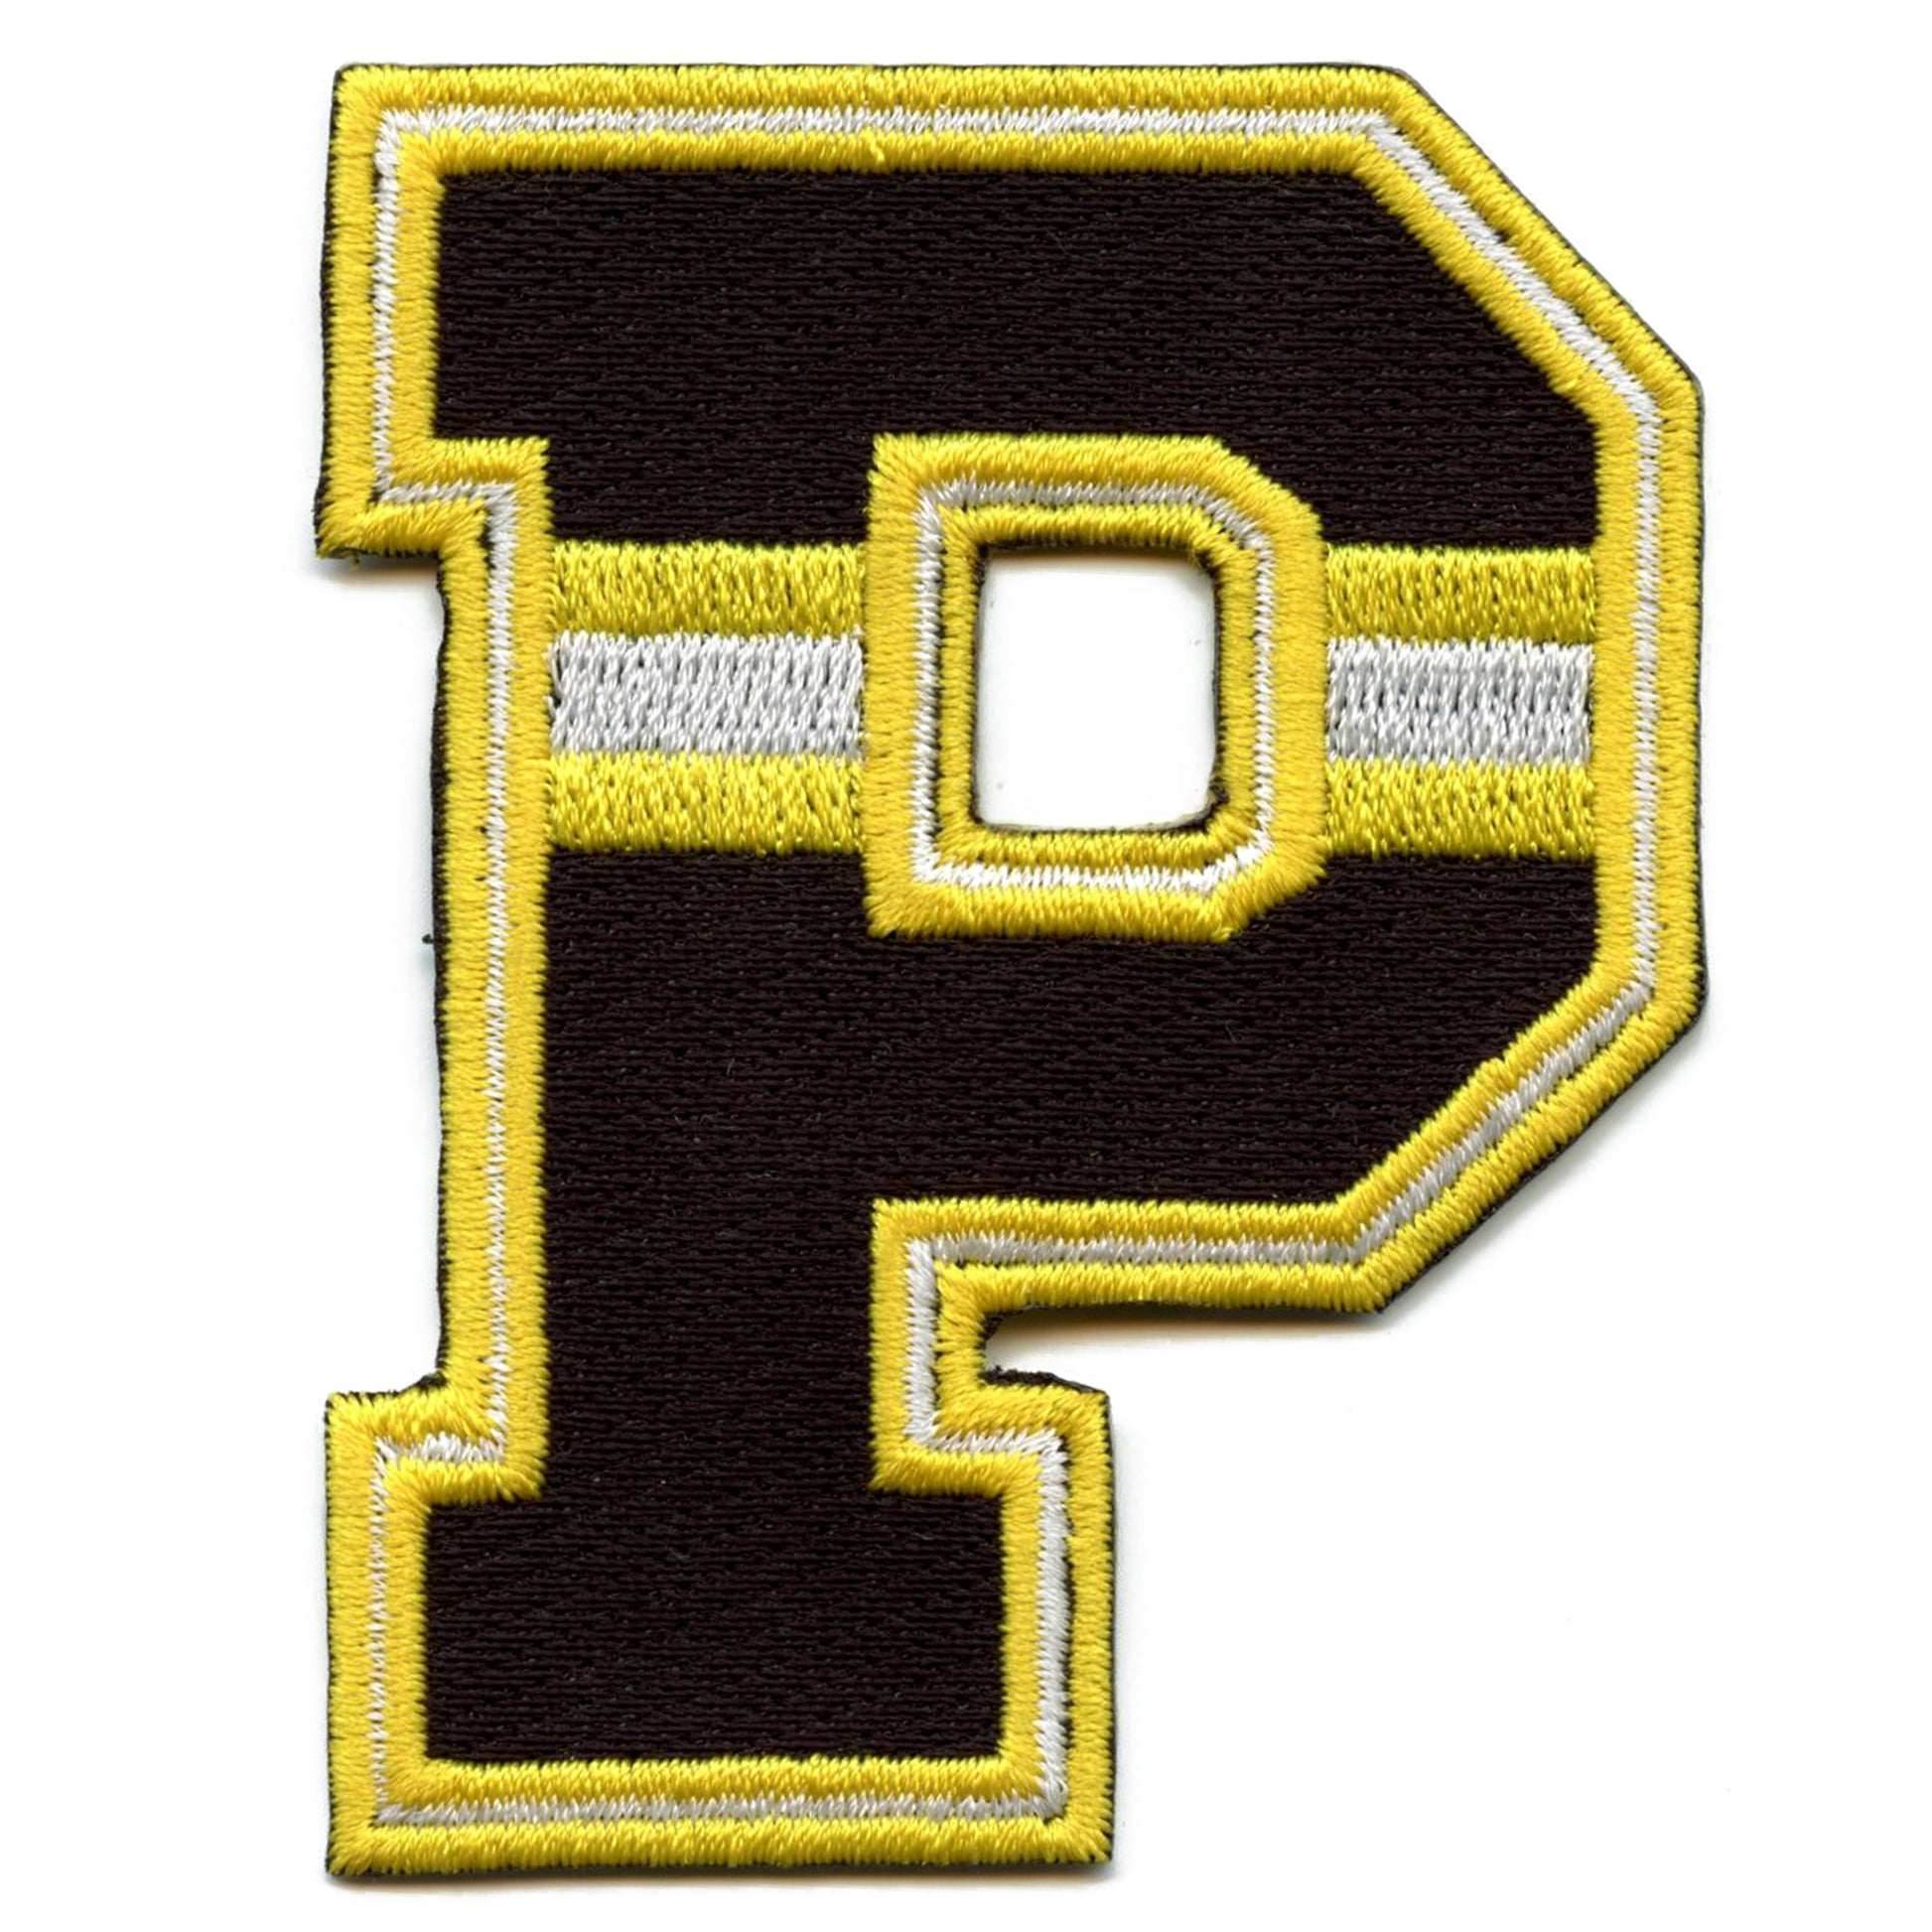 Letter Iron On Patches Sew On Appliques with Gold Embroidered Patch AZ  Letter Badge Decorate Repair Patches for Hats, Jackets, Shirts, Vests,  Shoes